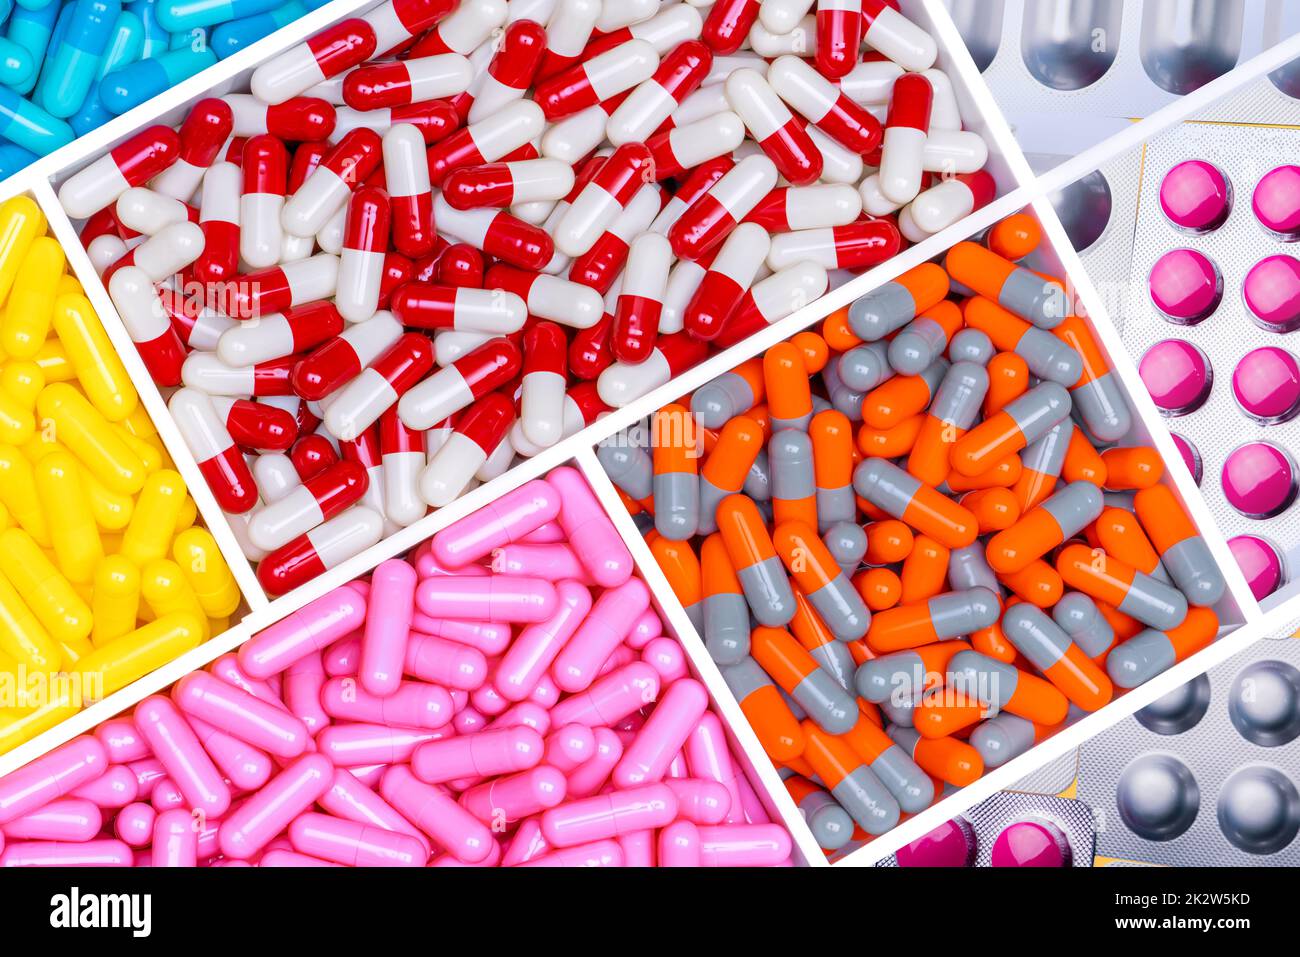 Top view of antibiotic capsules and tablet pills. Antibiotic drug resistance. Superbug. Full frame of multi-colored pills. Pharmaceutical industry. Prescription drugs. Healthcare and medicine. Stock Photo